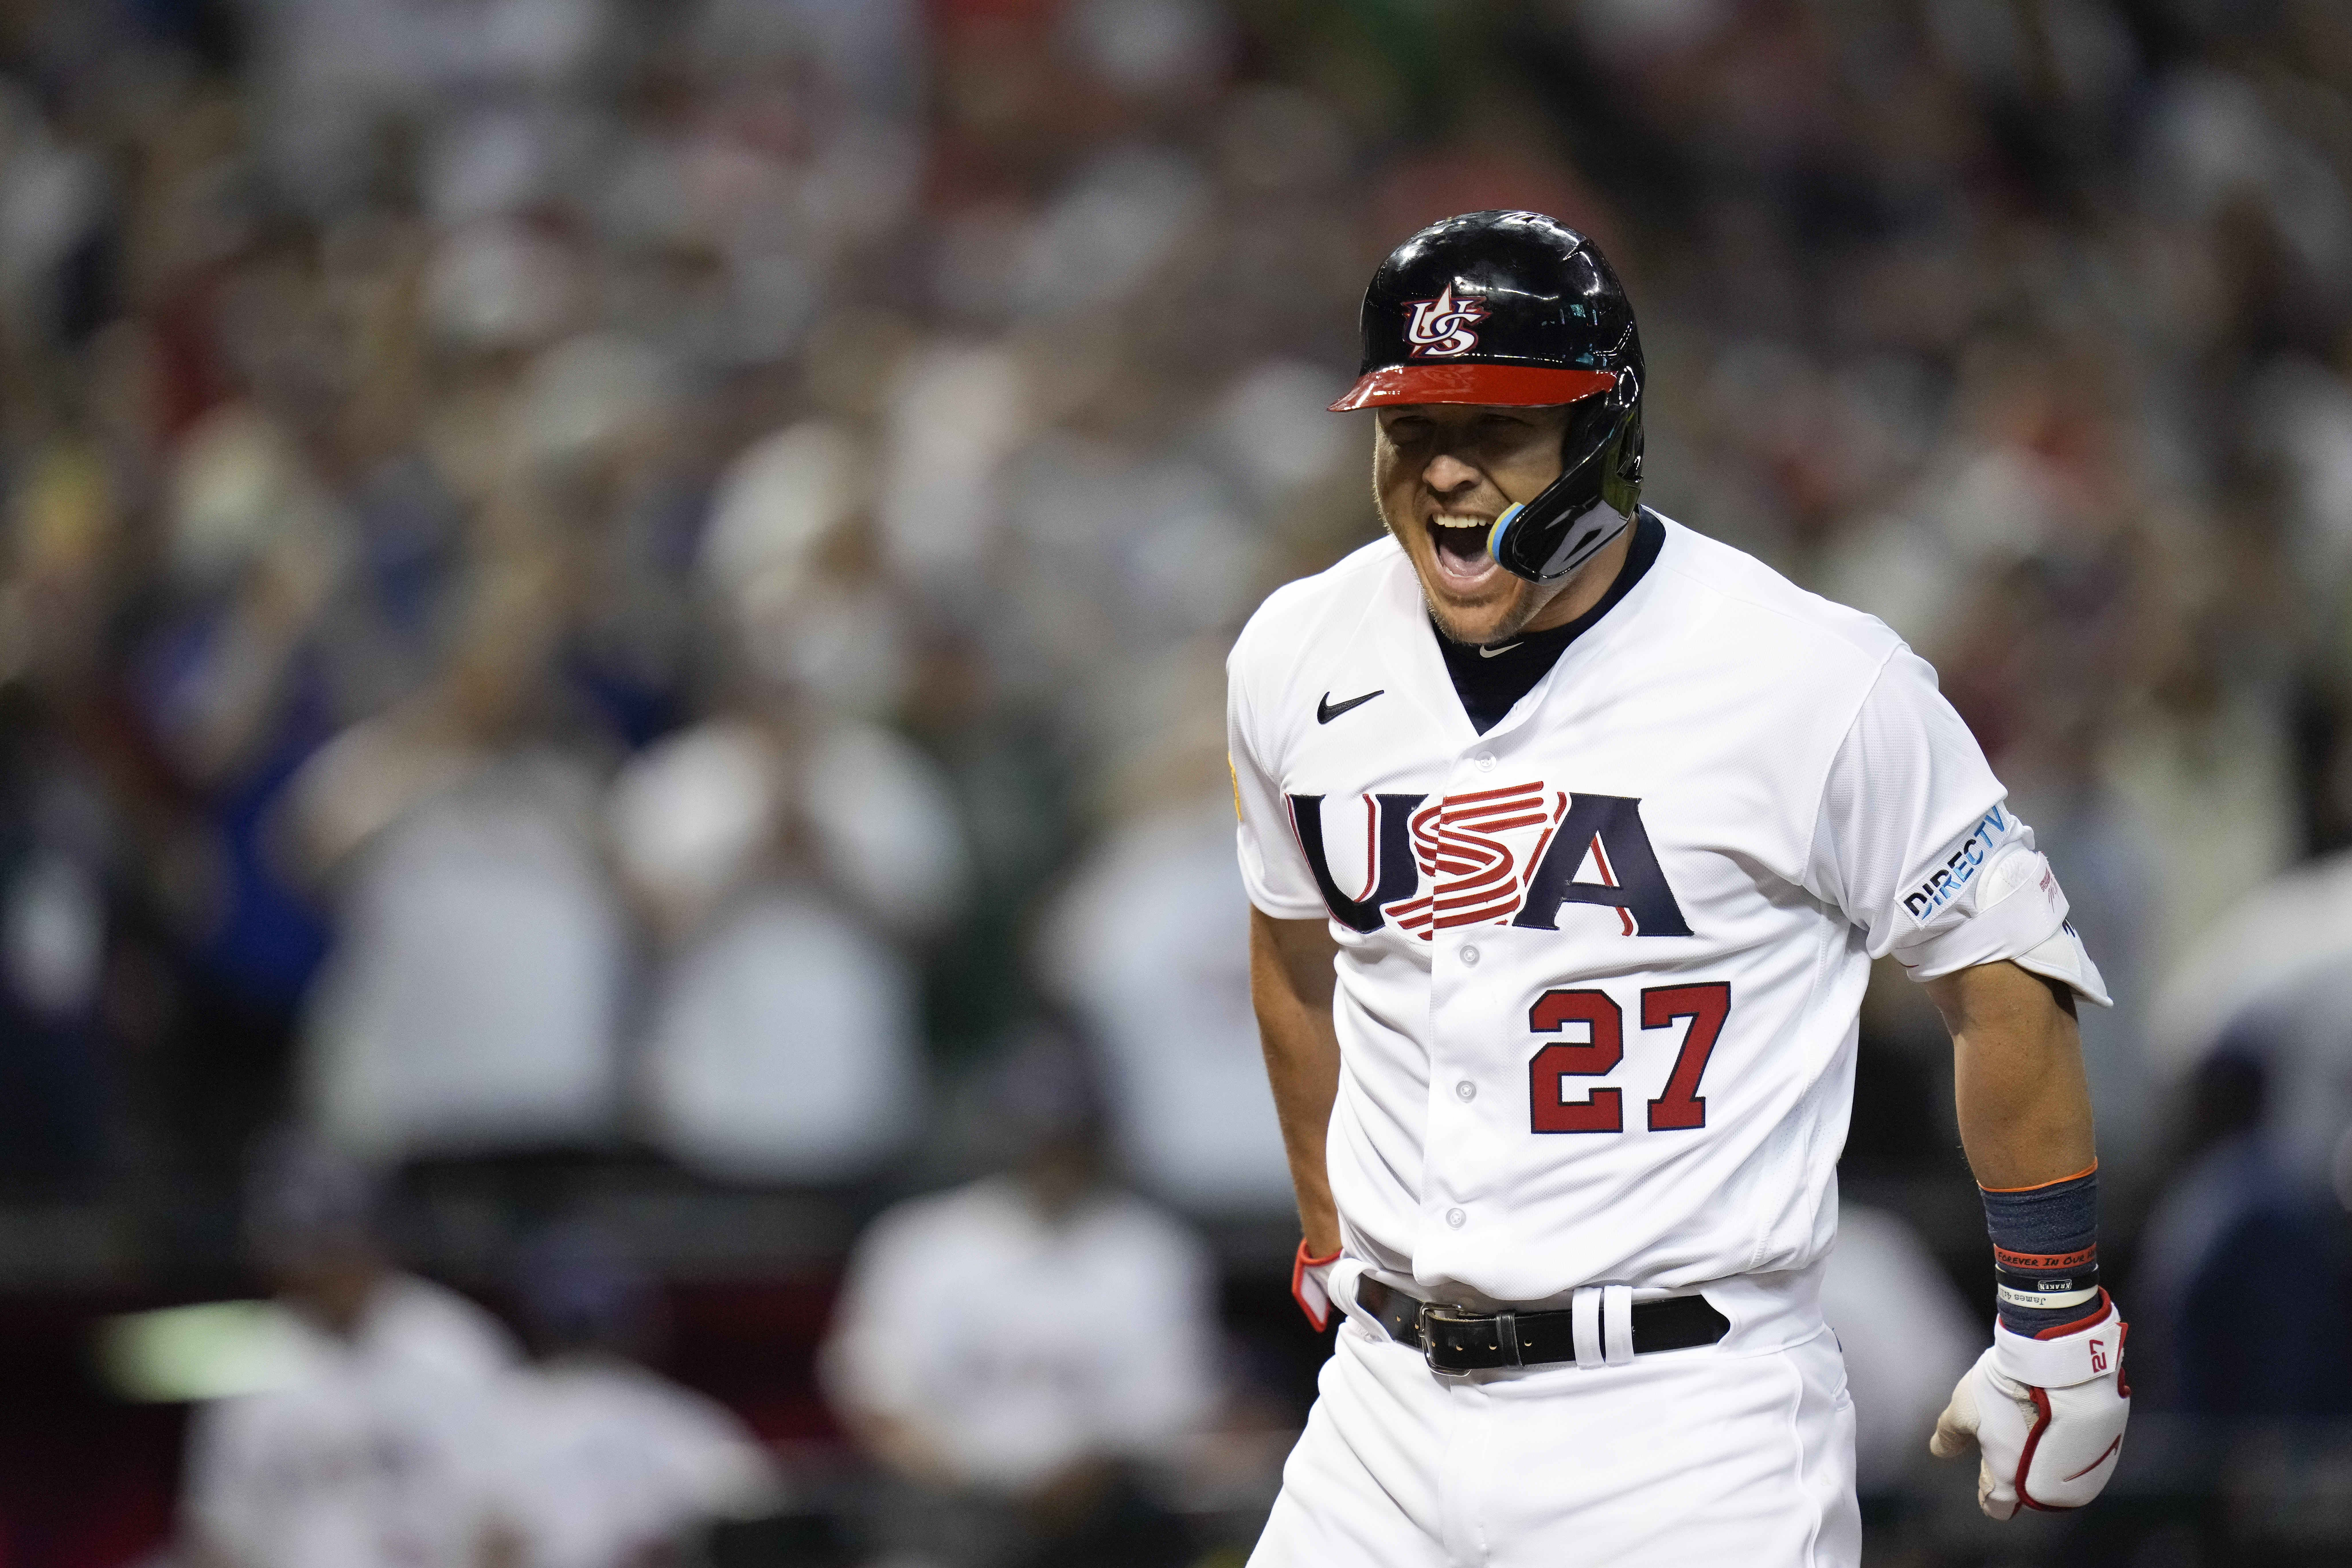 Trea Turner homers in Team USA's 12-1 rout of Canada in the WBC